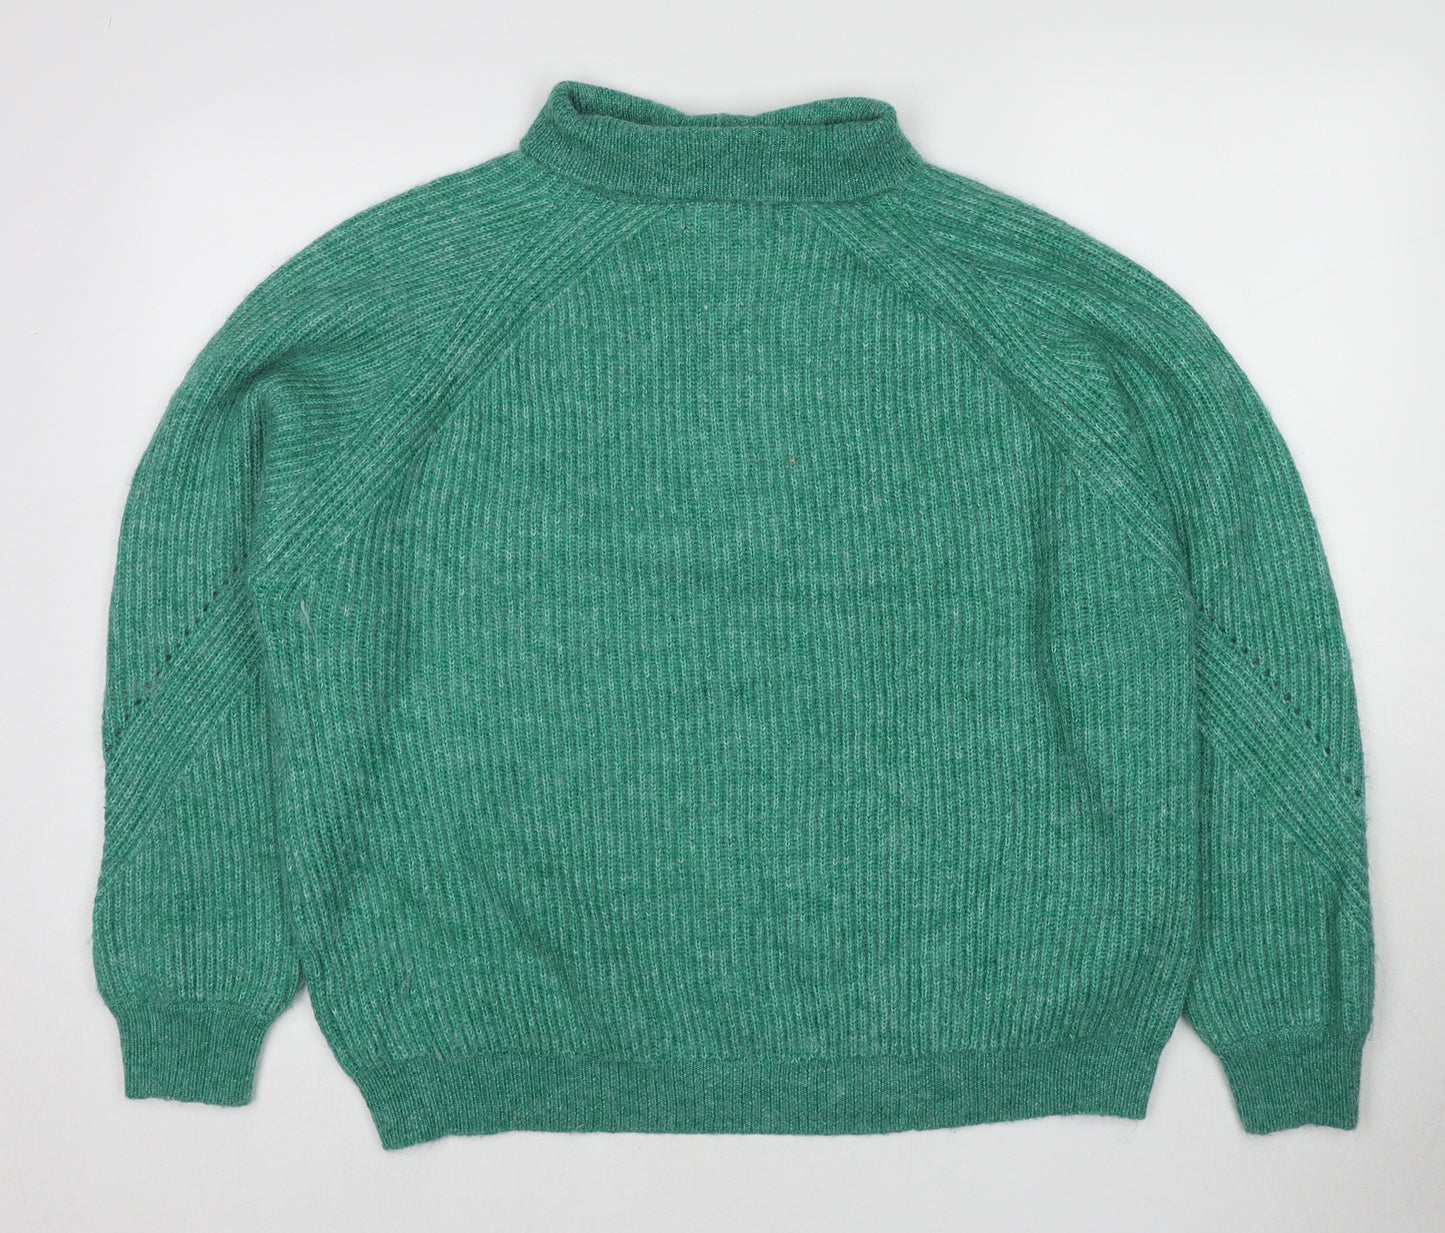 Marks and Spencer Womens Green High Neck Acrylic Pullover Jumper Size XL - Quater-Zip